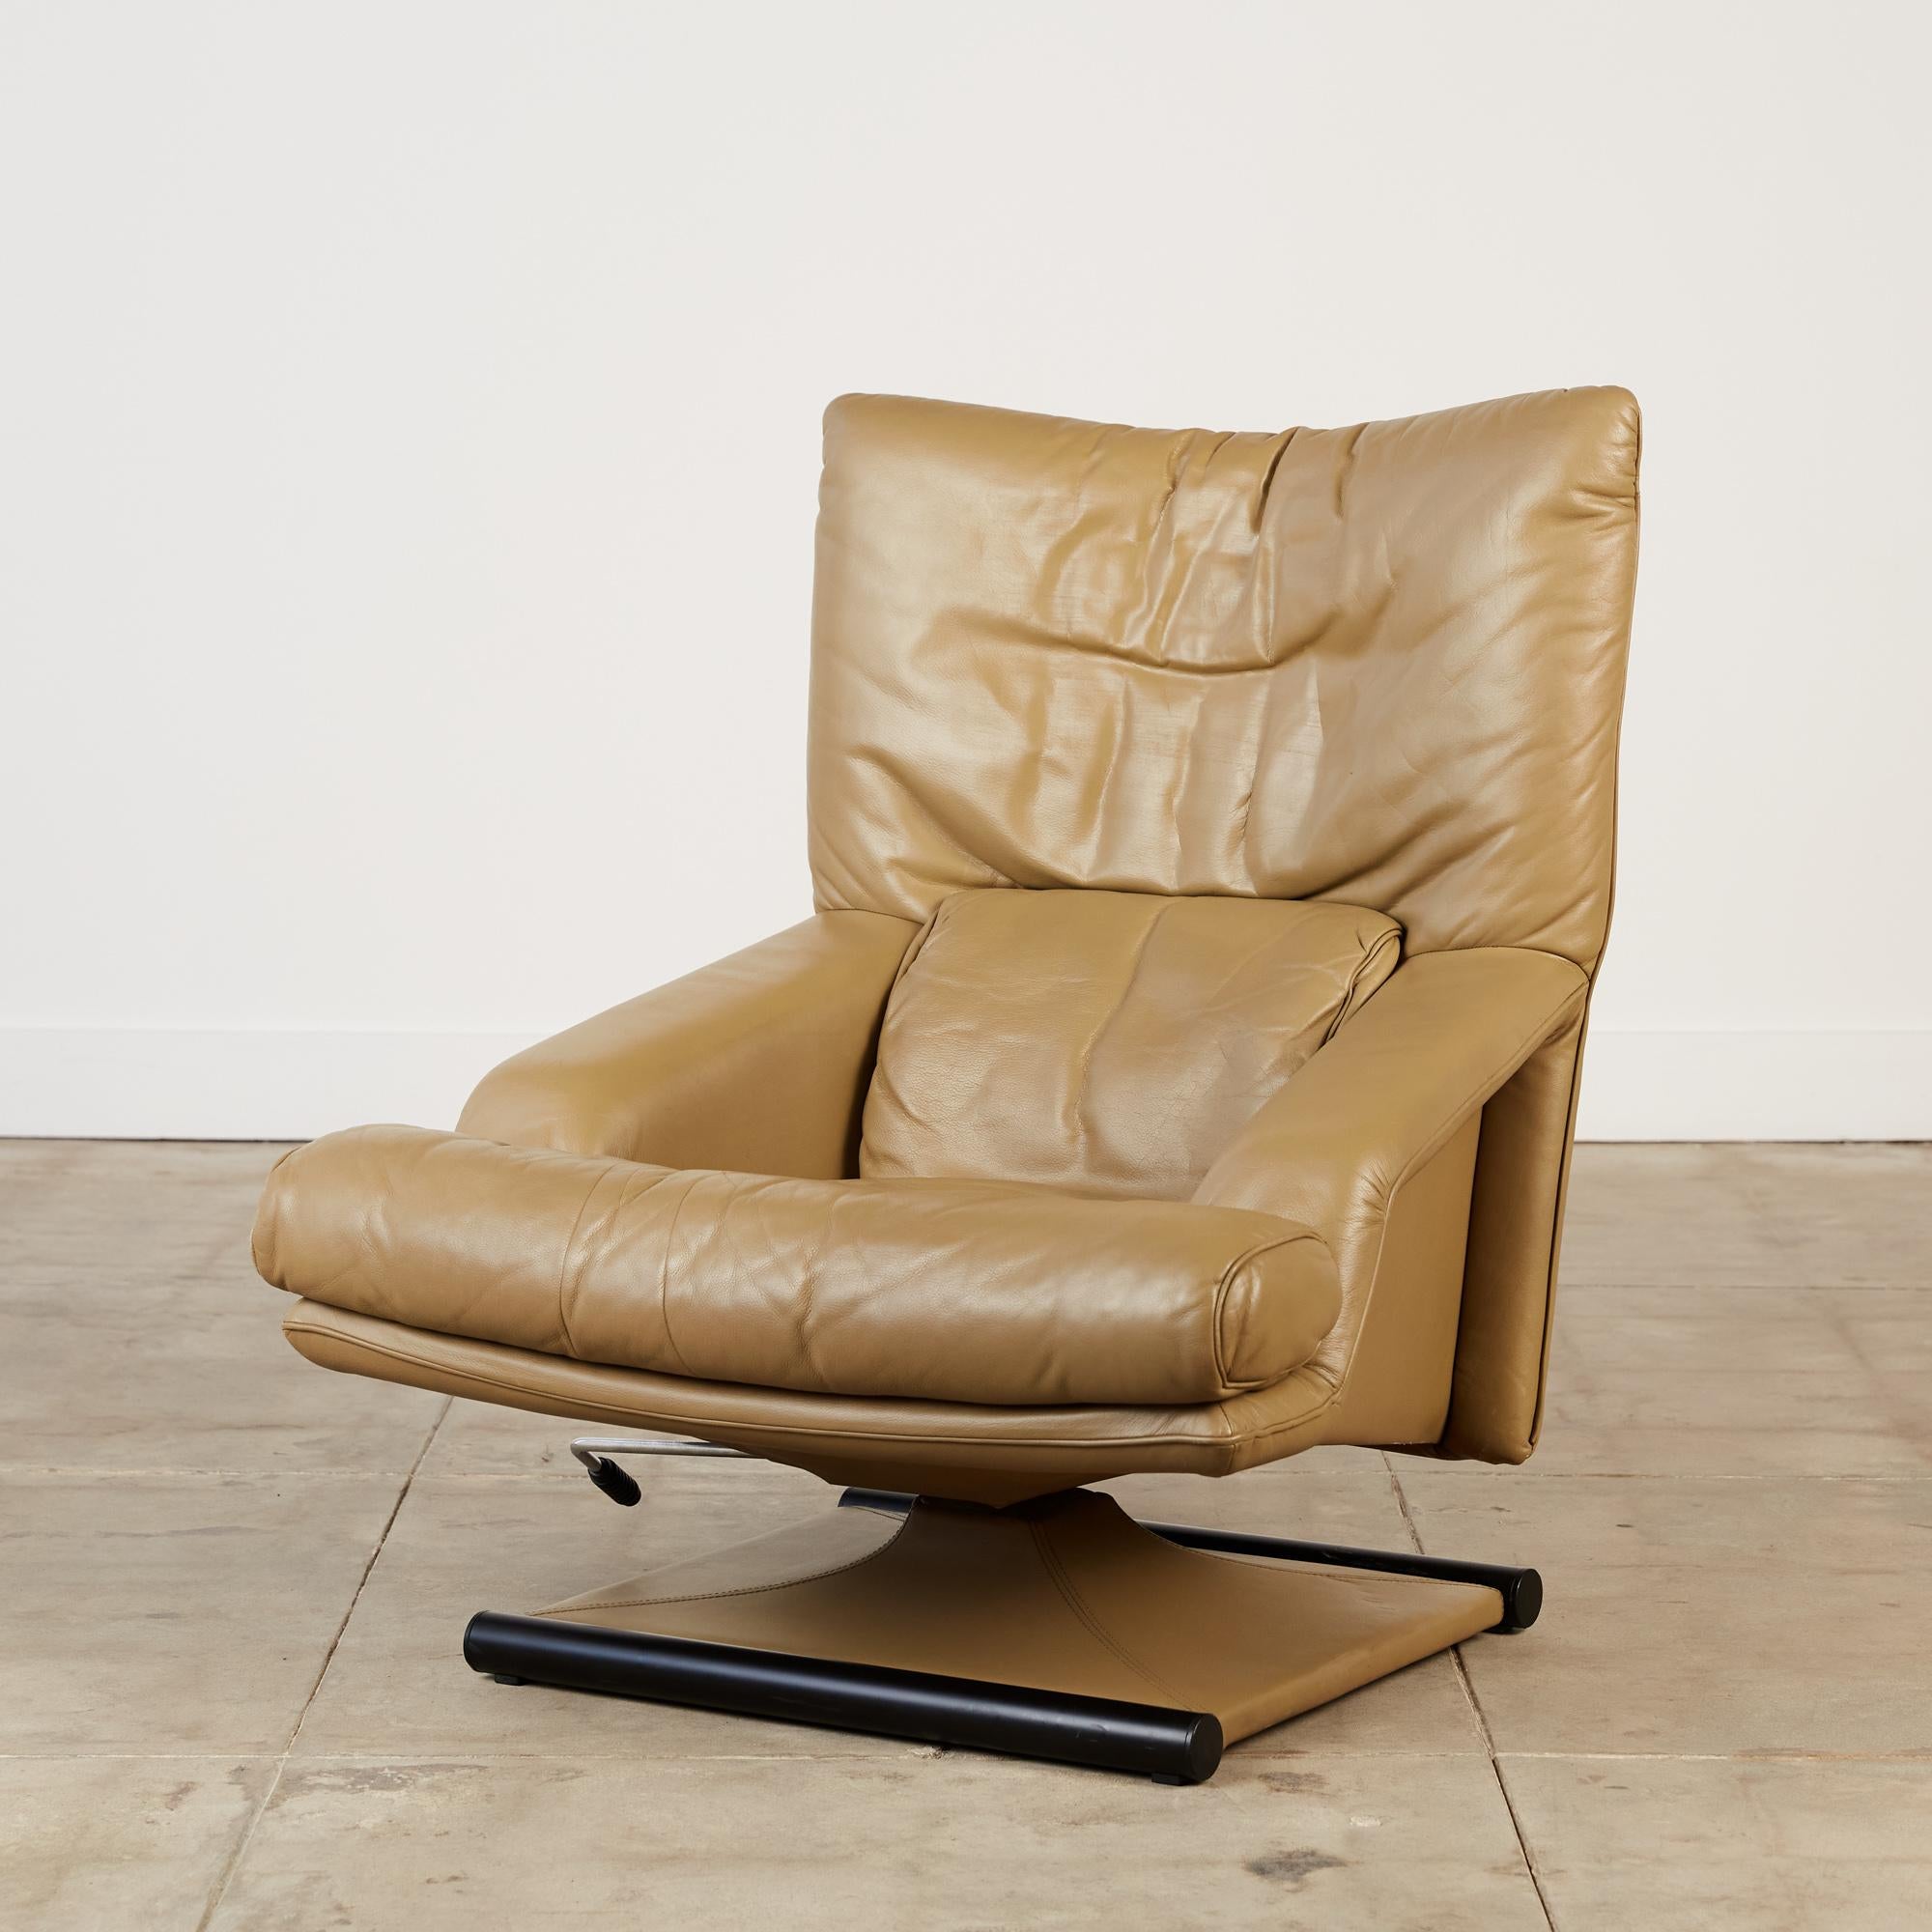 Post-Modern Mathias Hoffmann for Rolf Benz Leather Lounge Chair and Ottoman